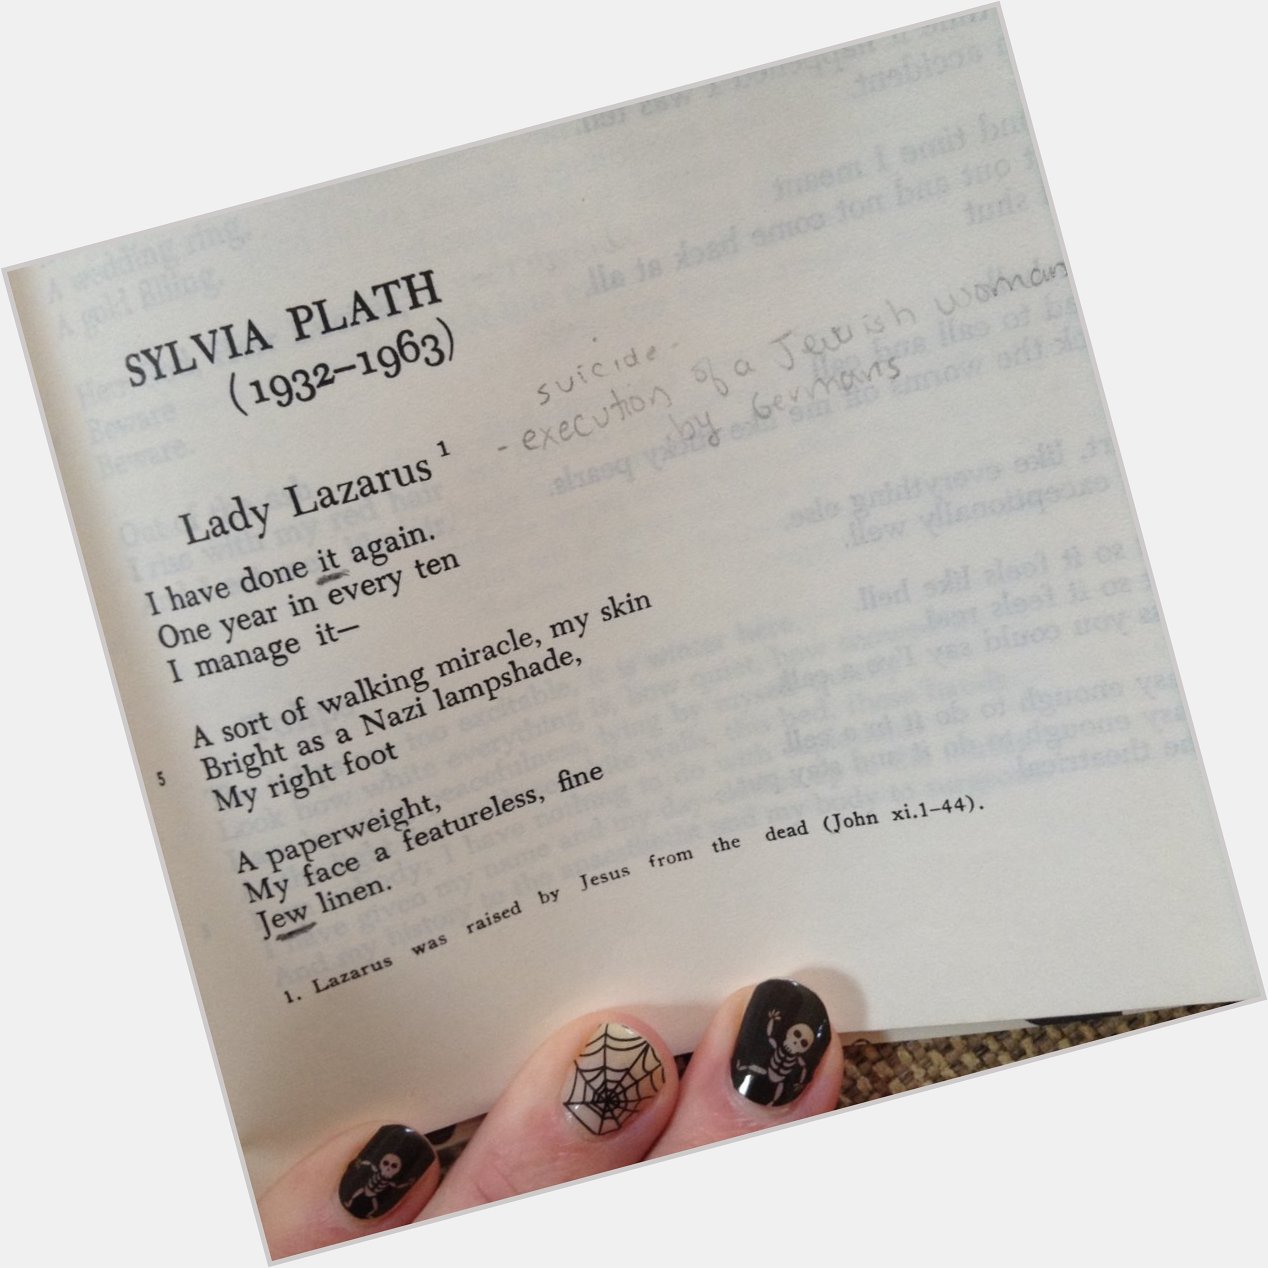 Happy Birthday Sylvia Plath! Helga and Rowena chat about poetry.  